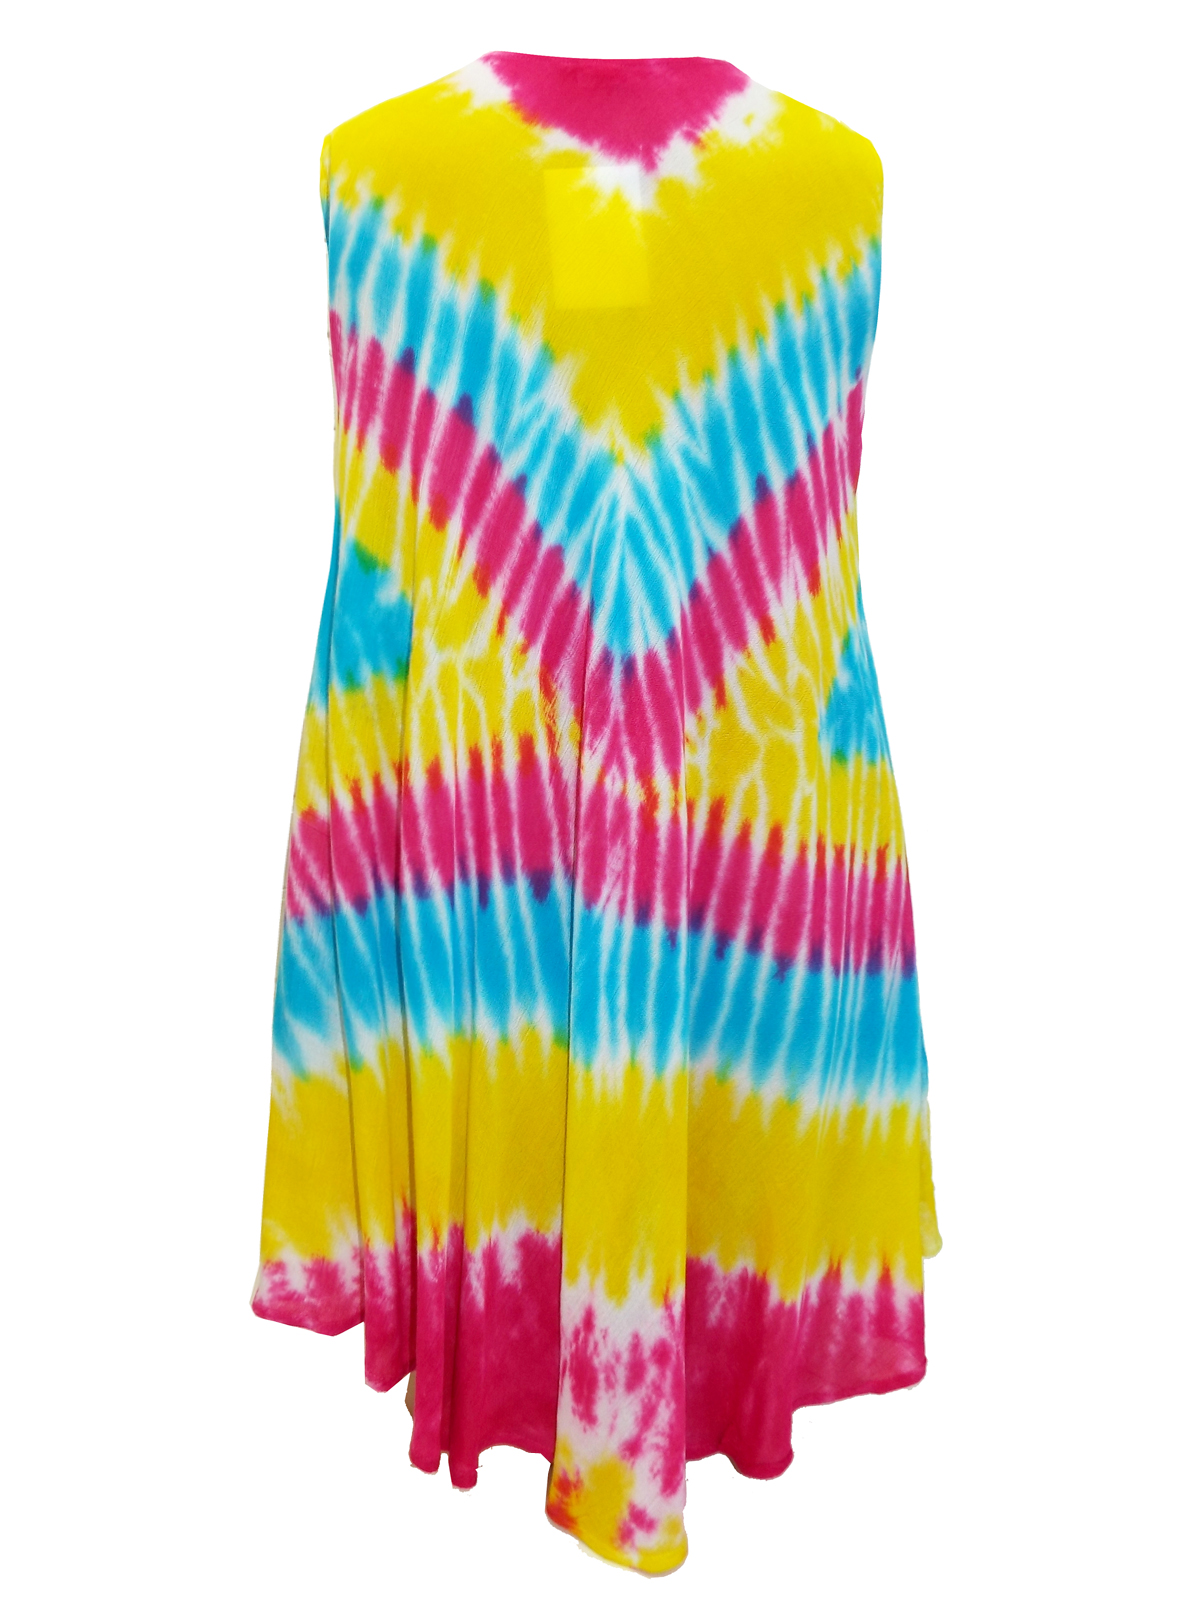 eaonplus Yellow/Pink Embroidered Batik Tie-Dye Summer Tunic - Plus Size ...